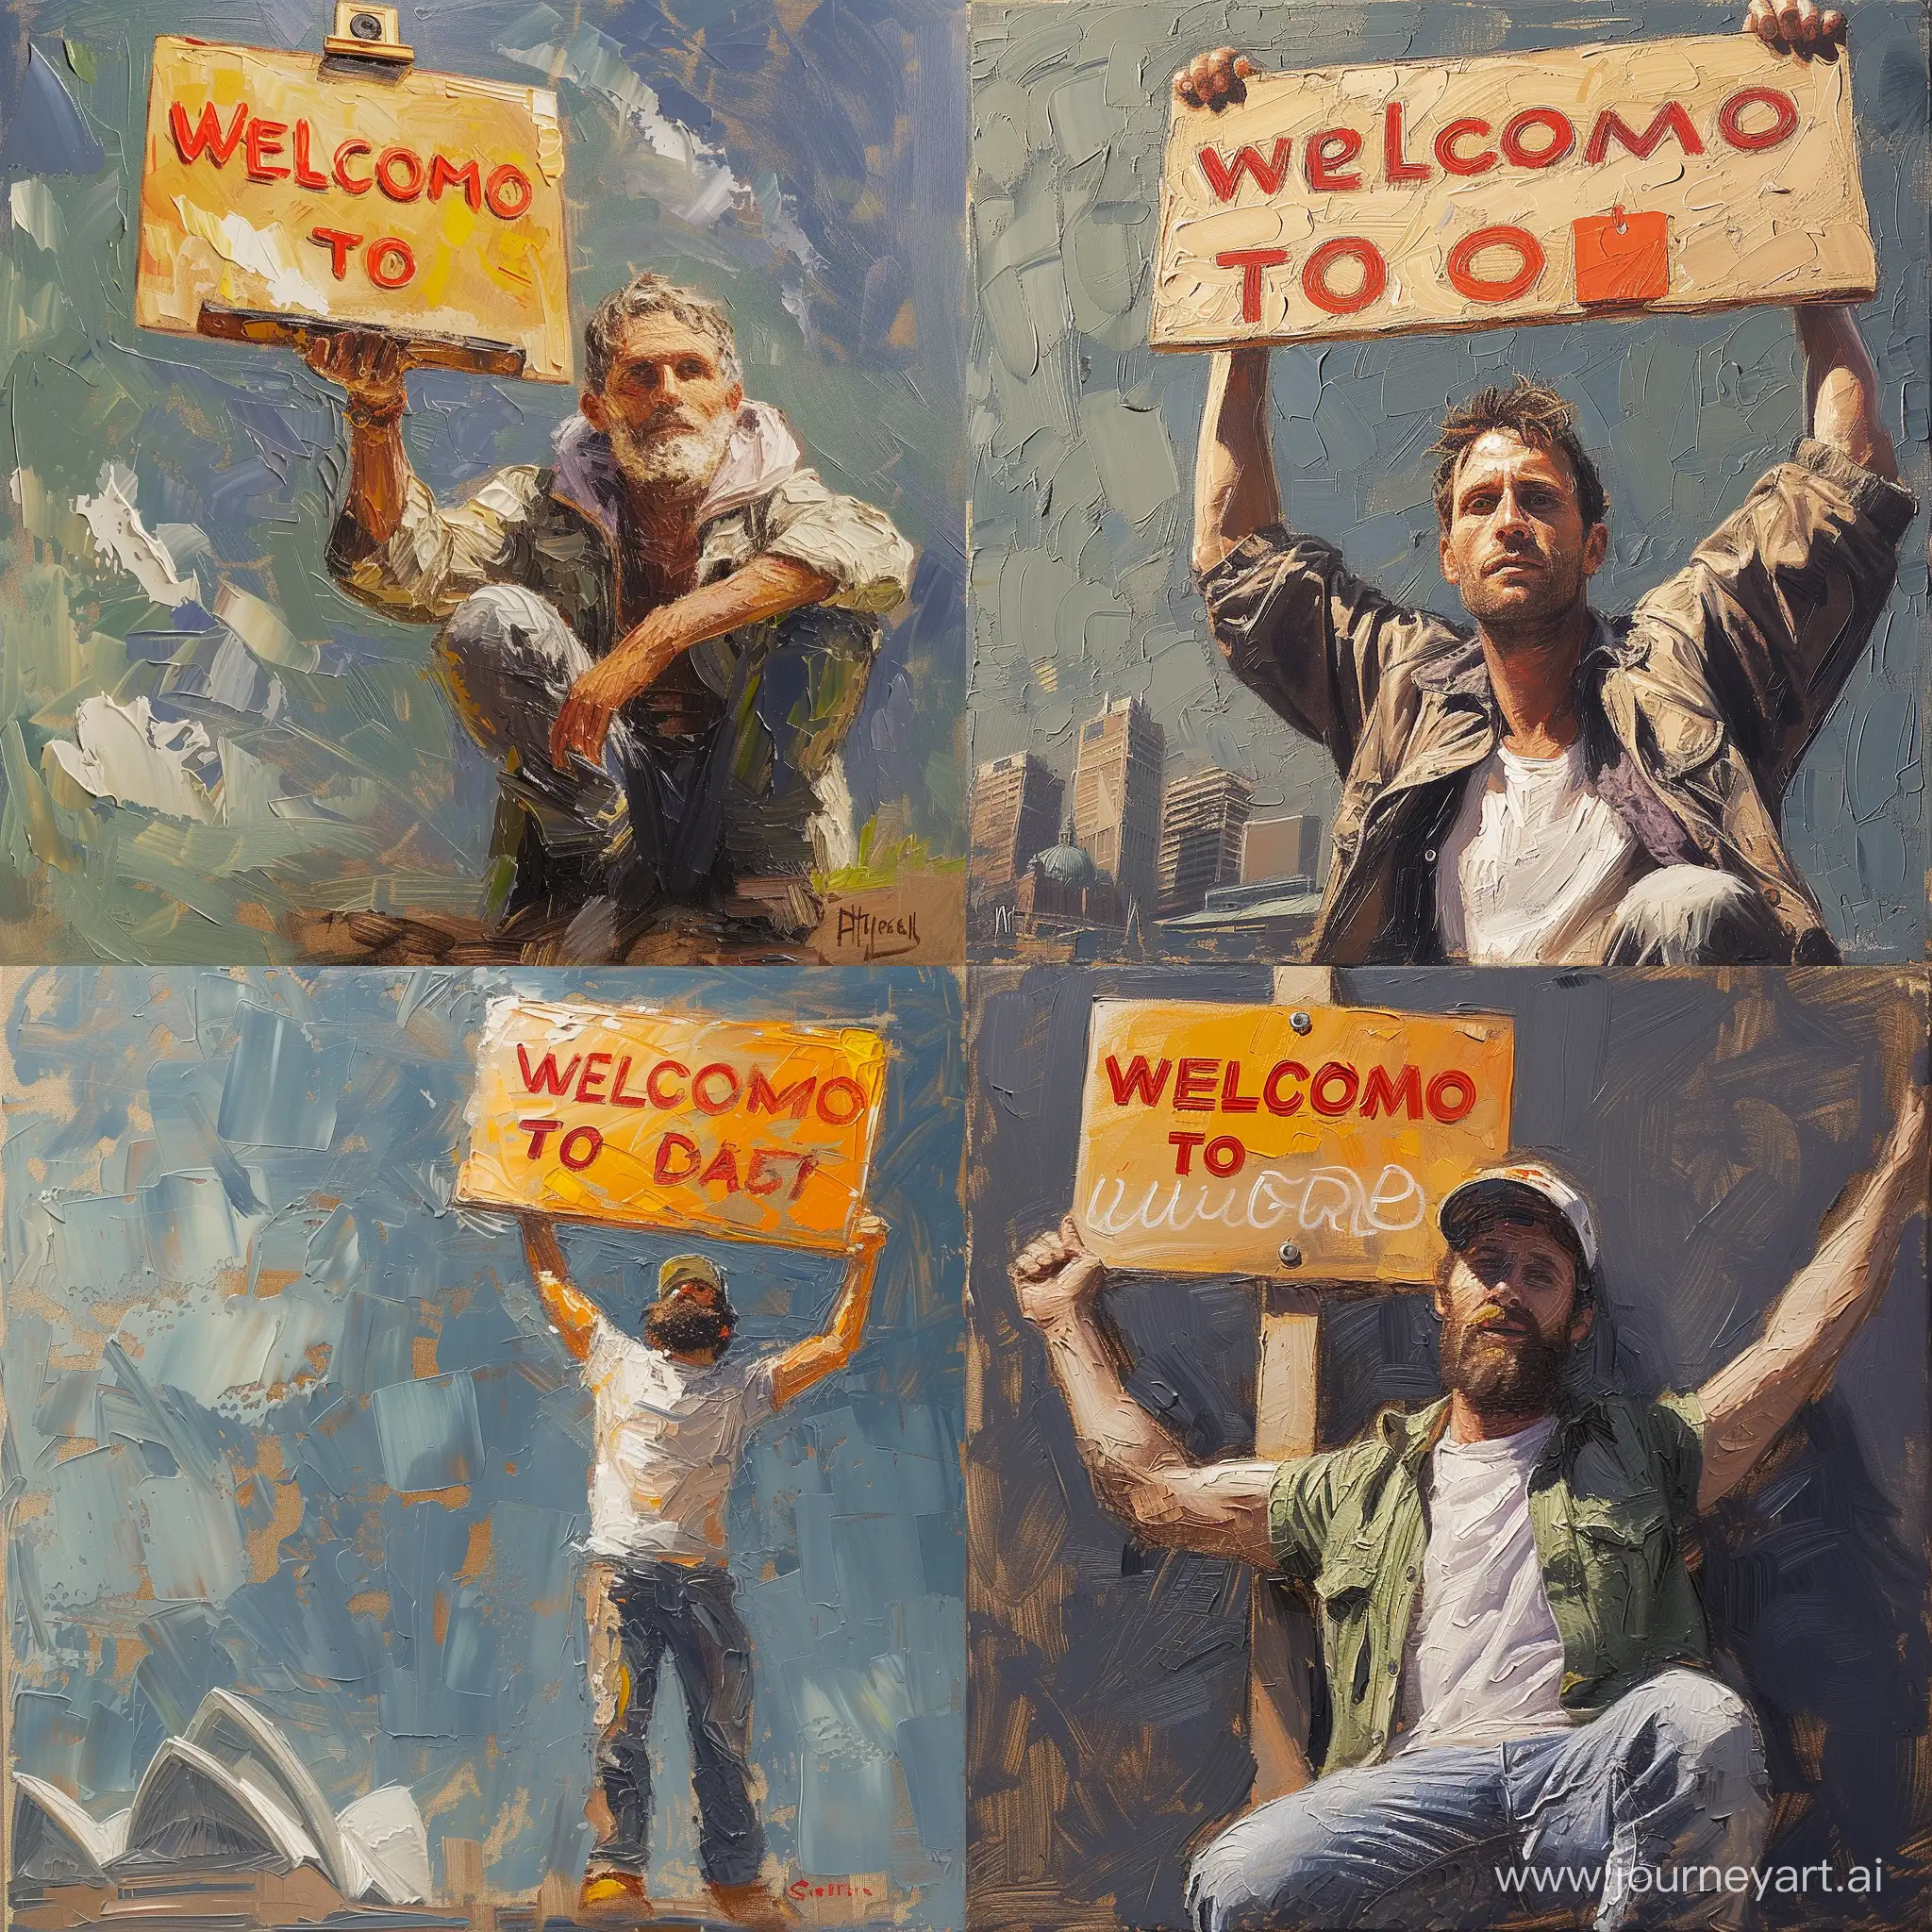 An oil painting of a man holding up a sign that says"welcome to Sydney"